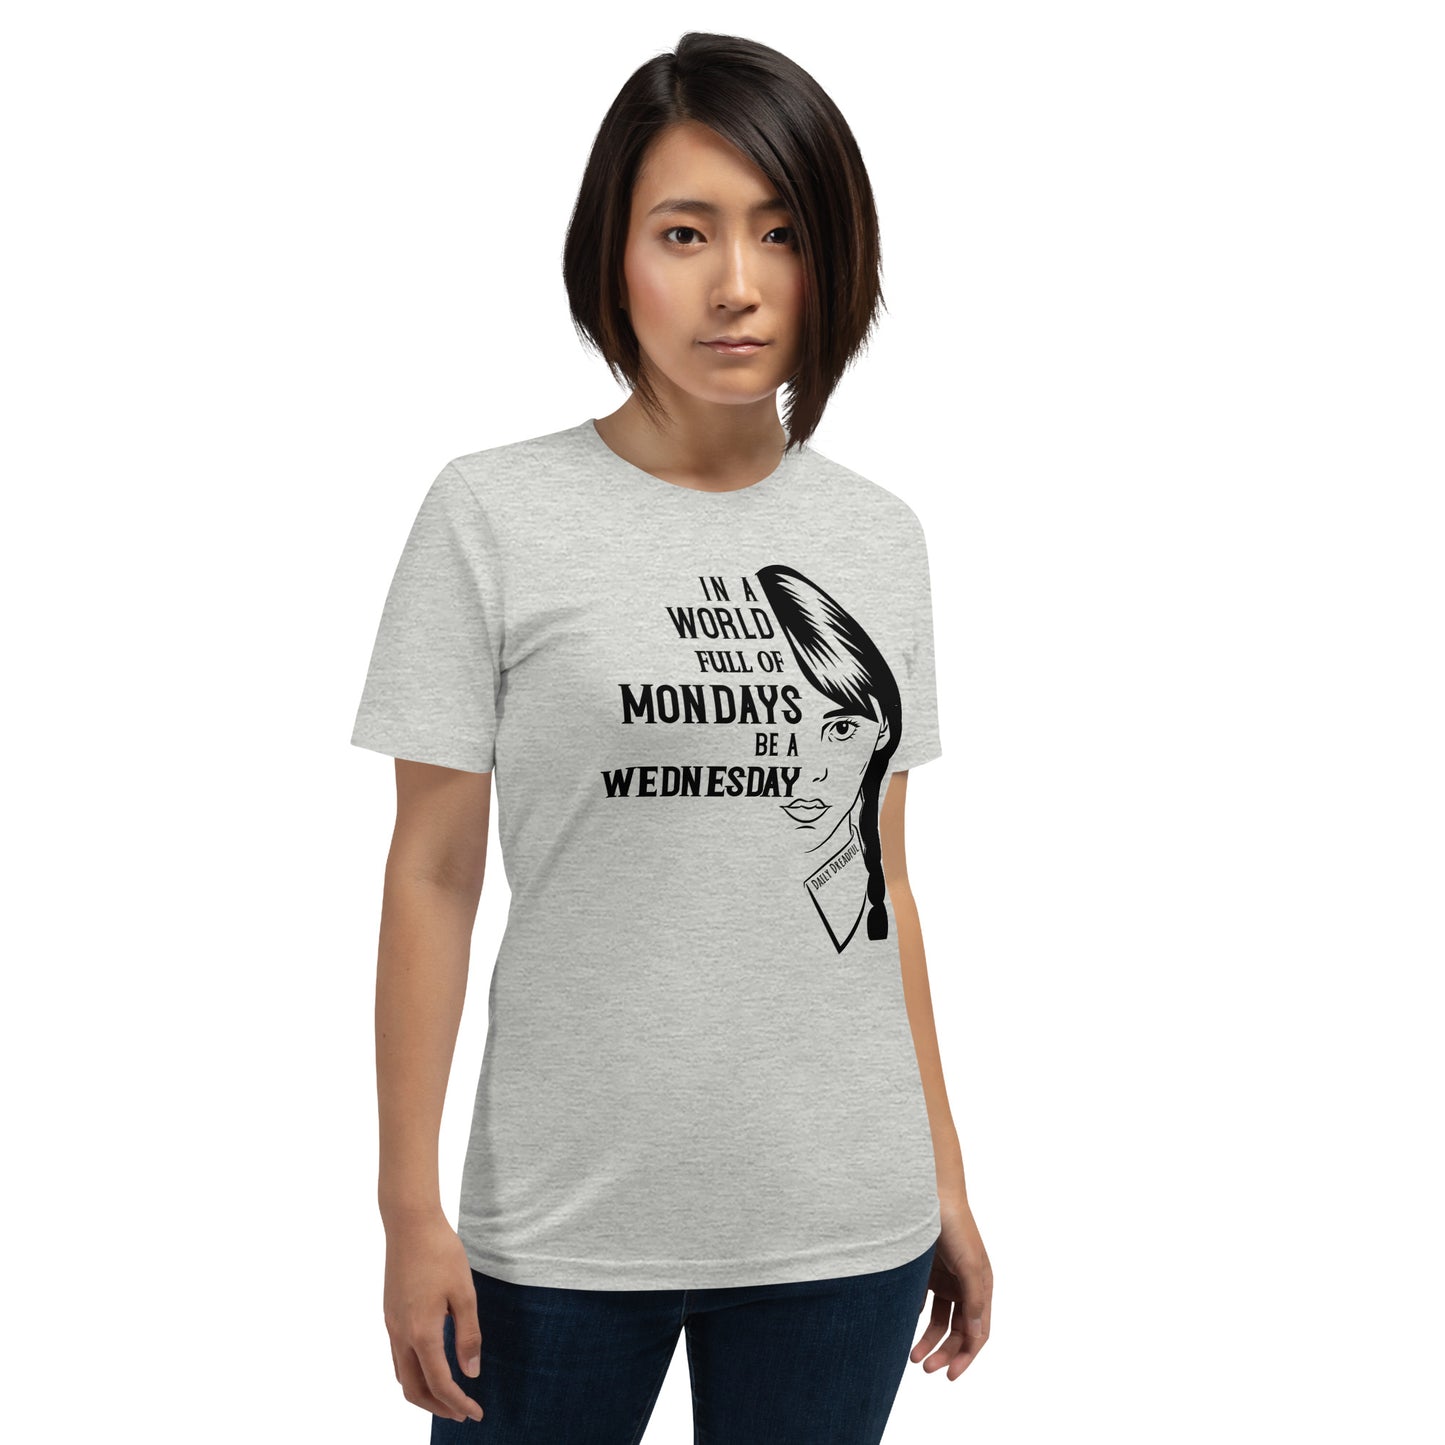 athletic heather "Wednesday Addams Monday" t-shirt from Daily Dreadful